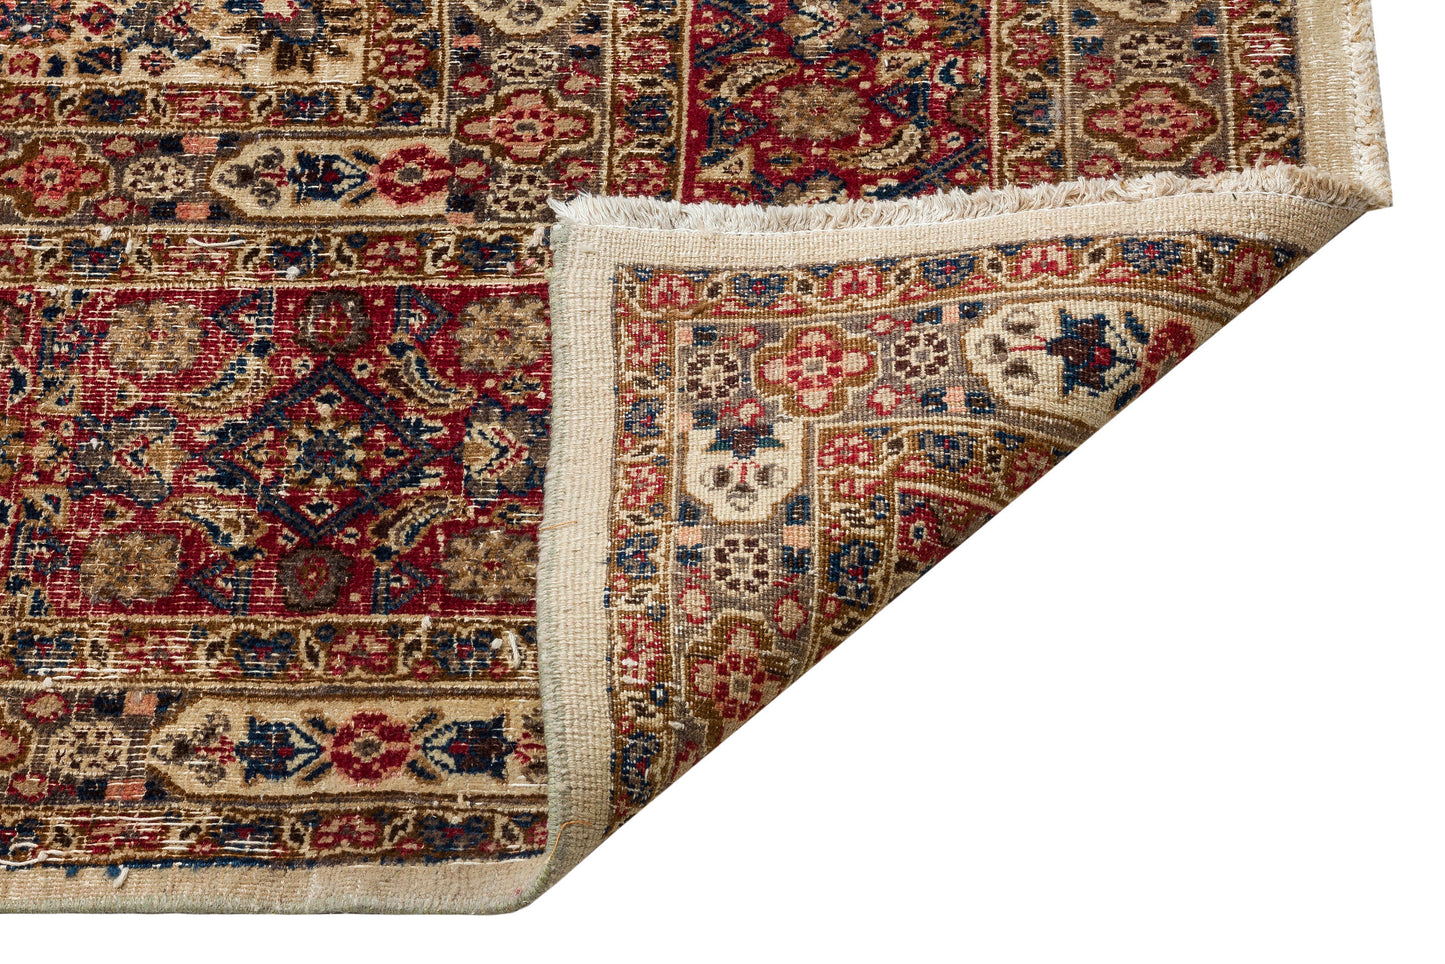 Vintage Rugs by Piginda: Timeless Beauty for Your Home,9'9" x 13'1"